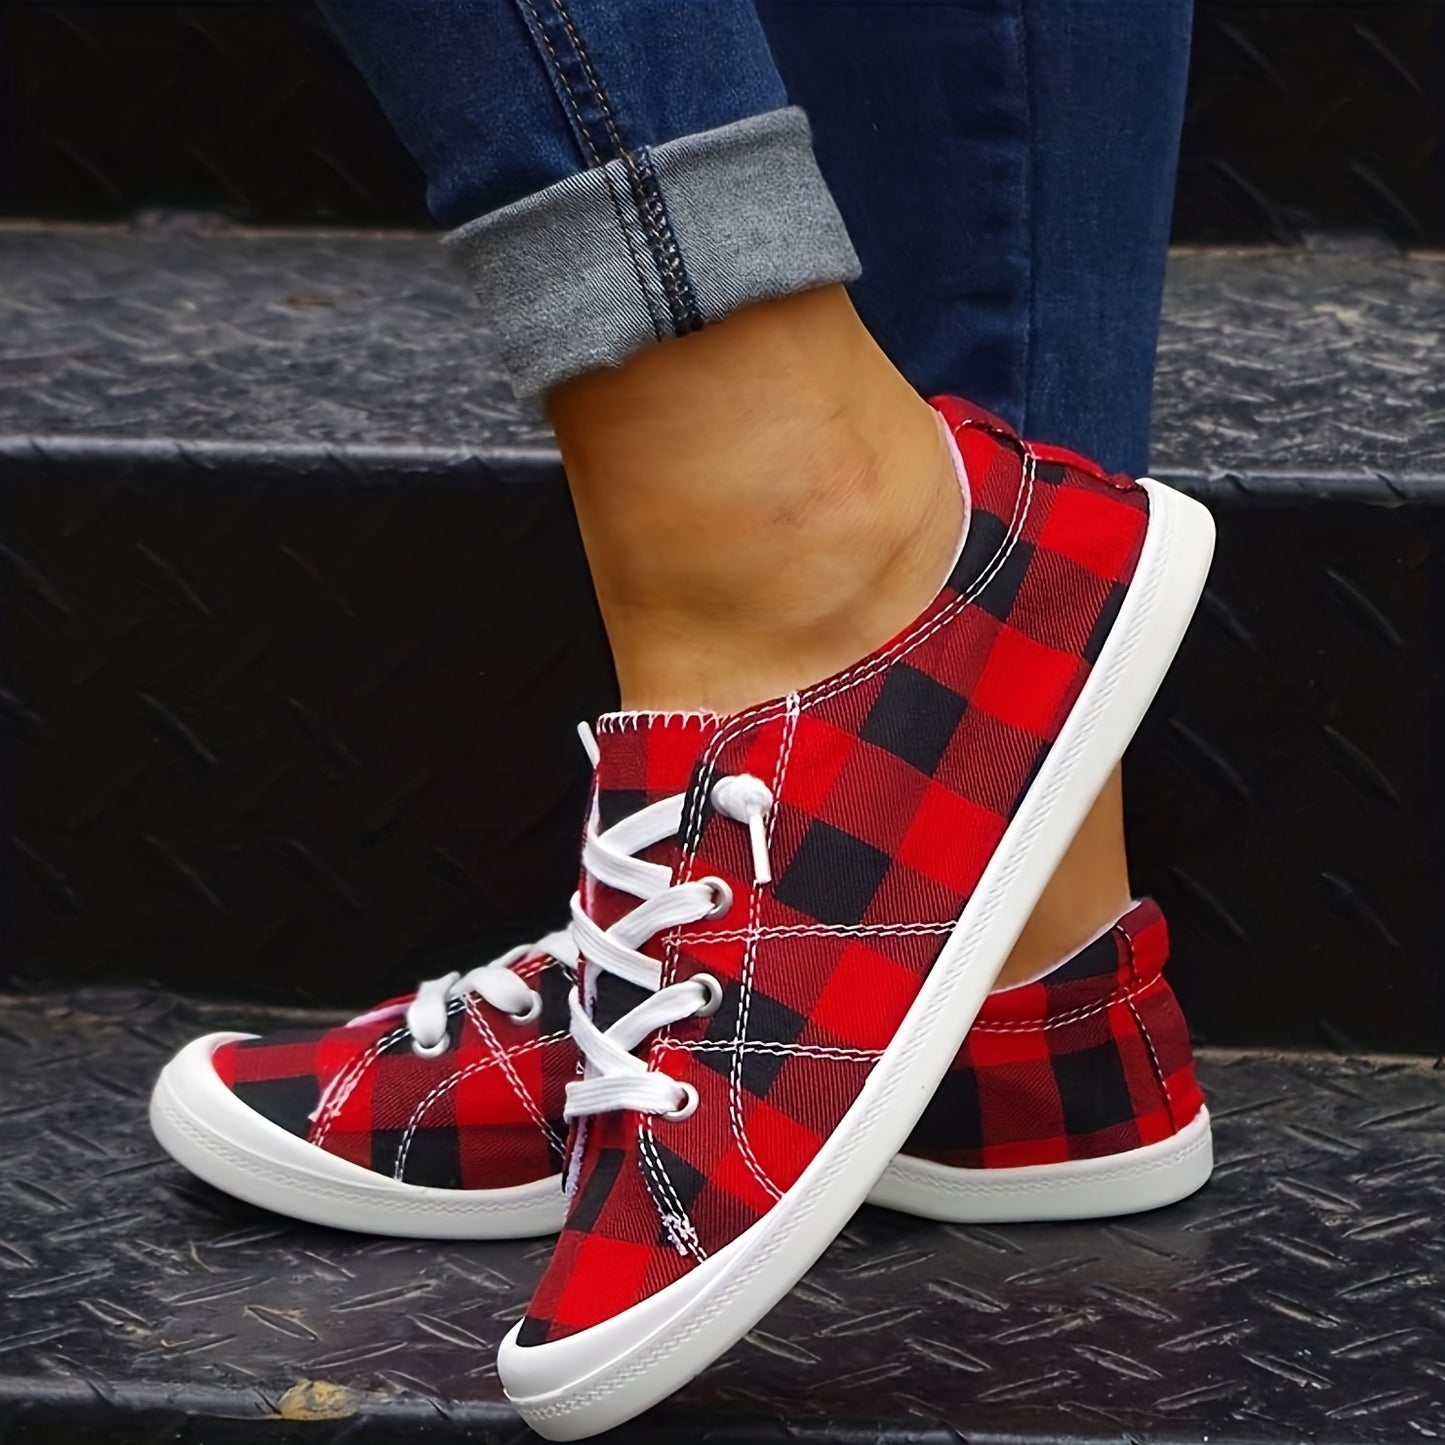 Women's Plaid Pattern Canvas Shoes, Casual Lace Up Outdoor Shoes, Lightweight Low Top Sneakers